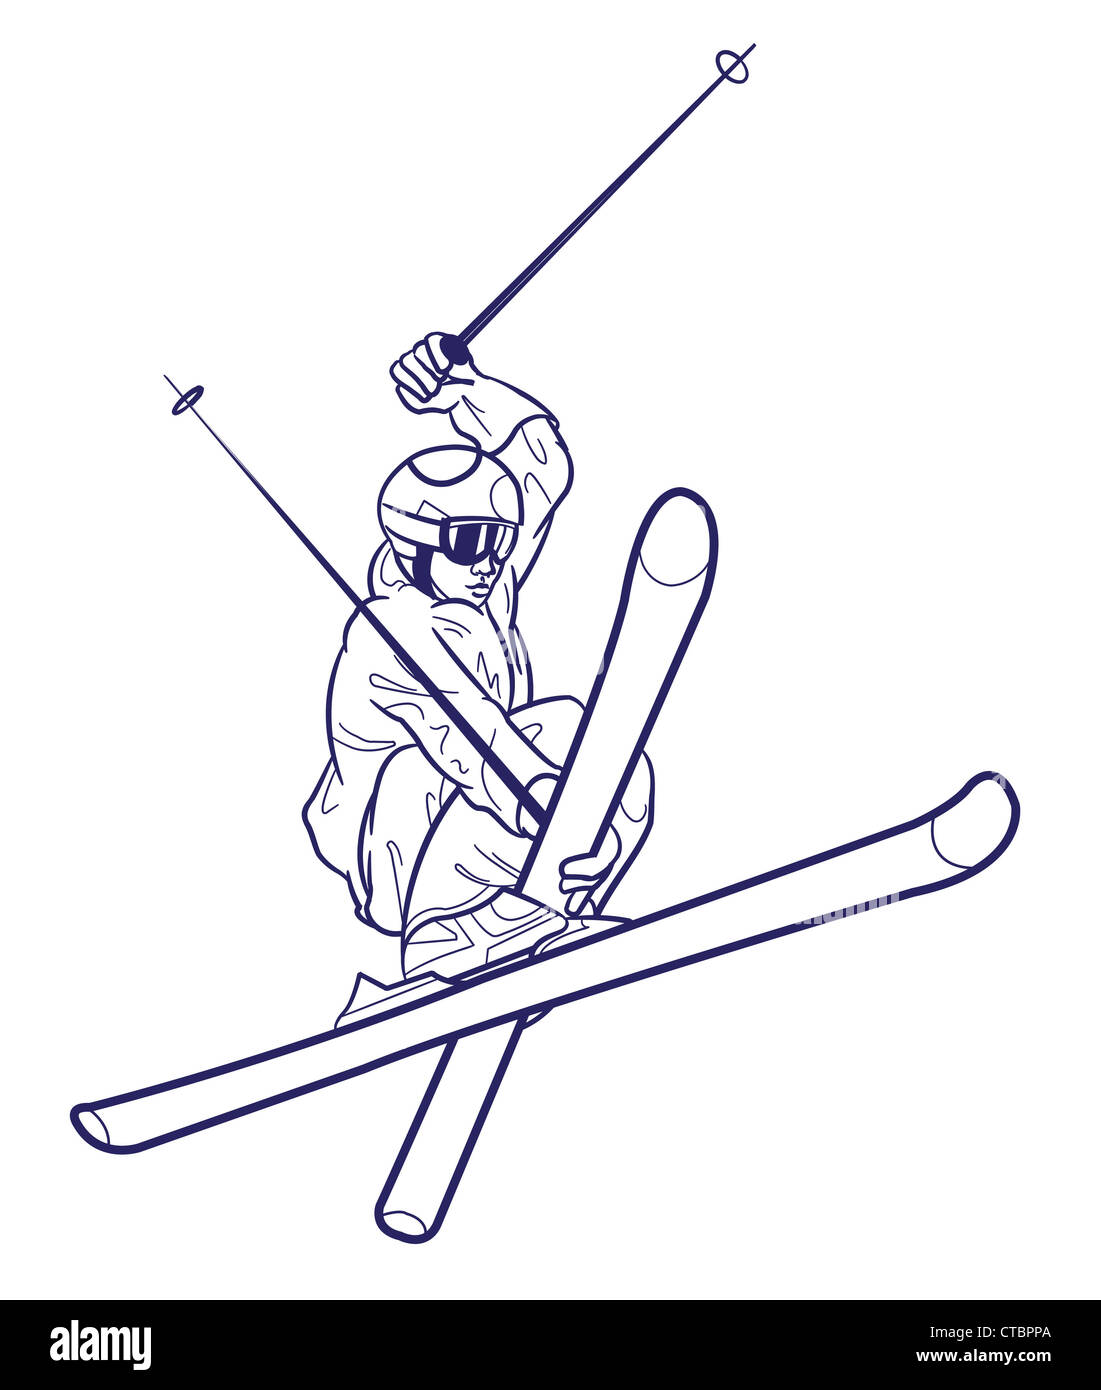 Line drawing of person skiing. Stock Photo